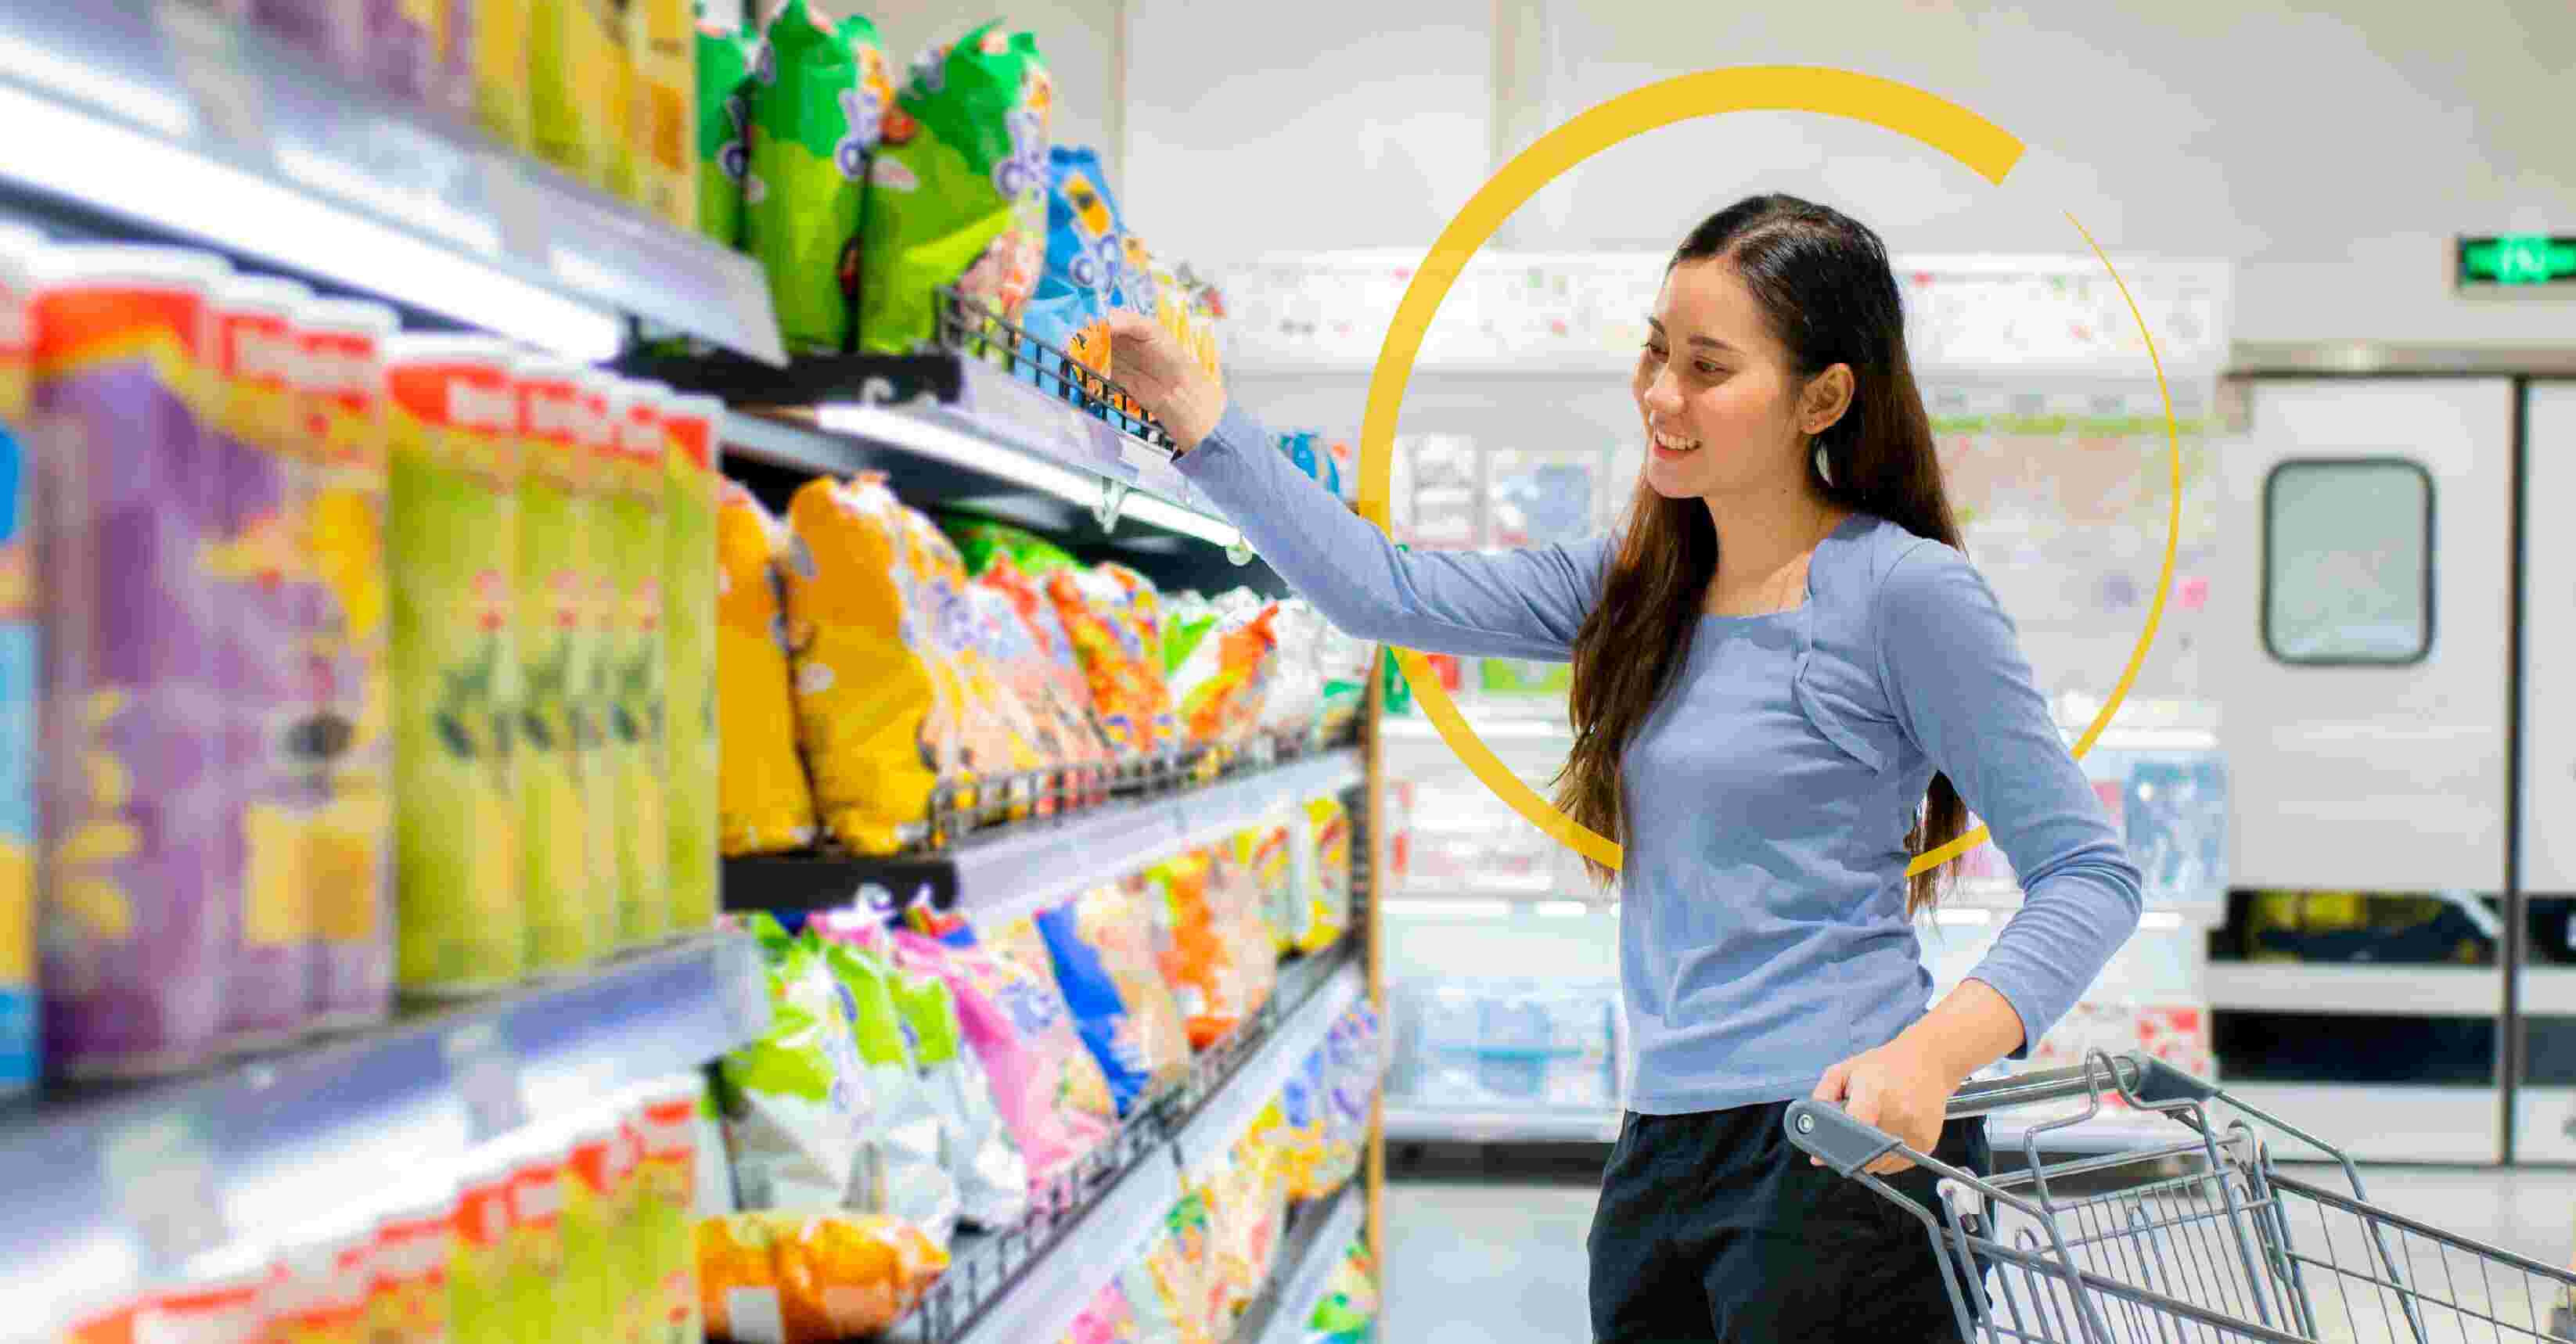 Driving Demand & Obtain Real-time Sales Insights For FMCG with Channel Rewards Program